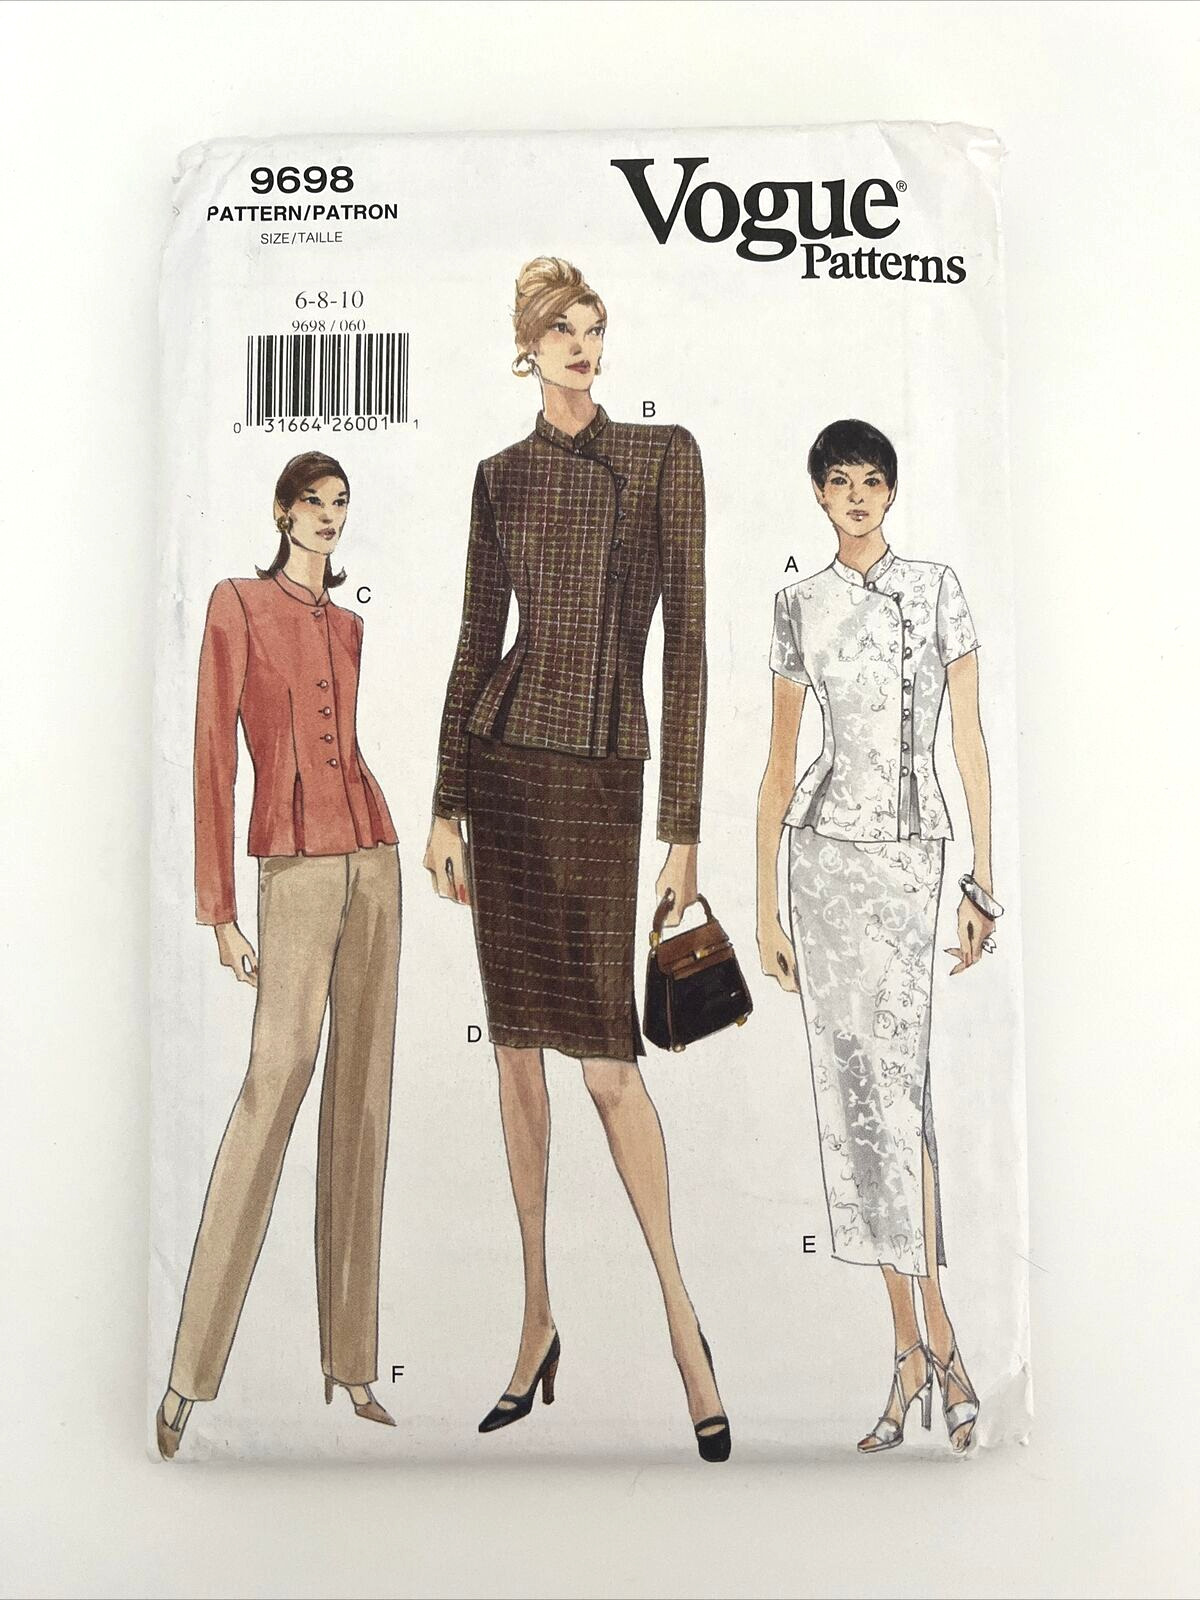 Vogue 9698 Semi Fitted Top Tapered Skirt Mandarin Collar Size 6-8-10 UNCUT